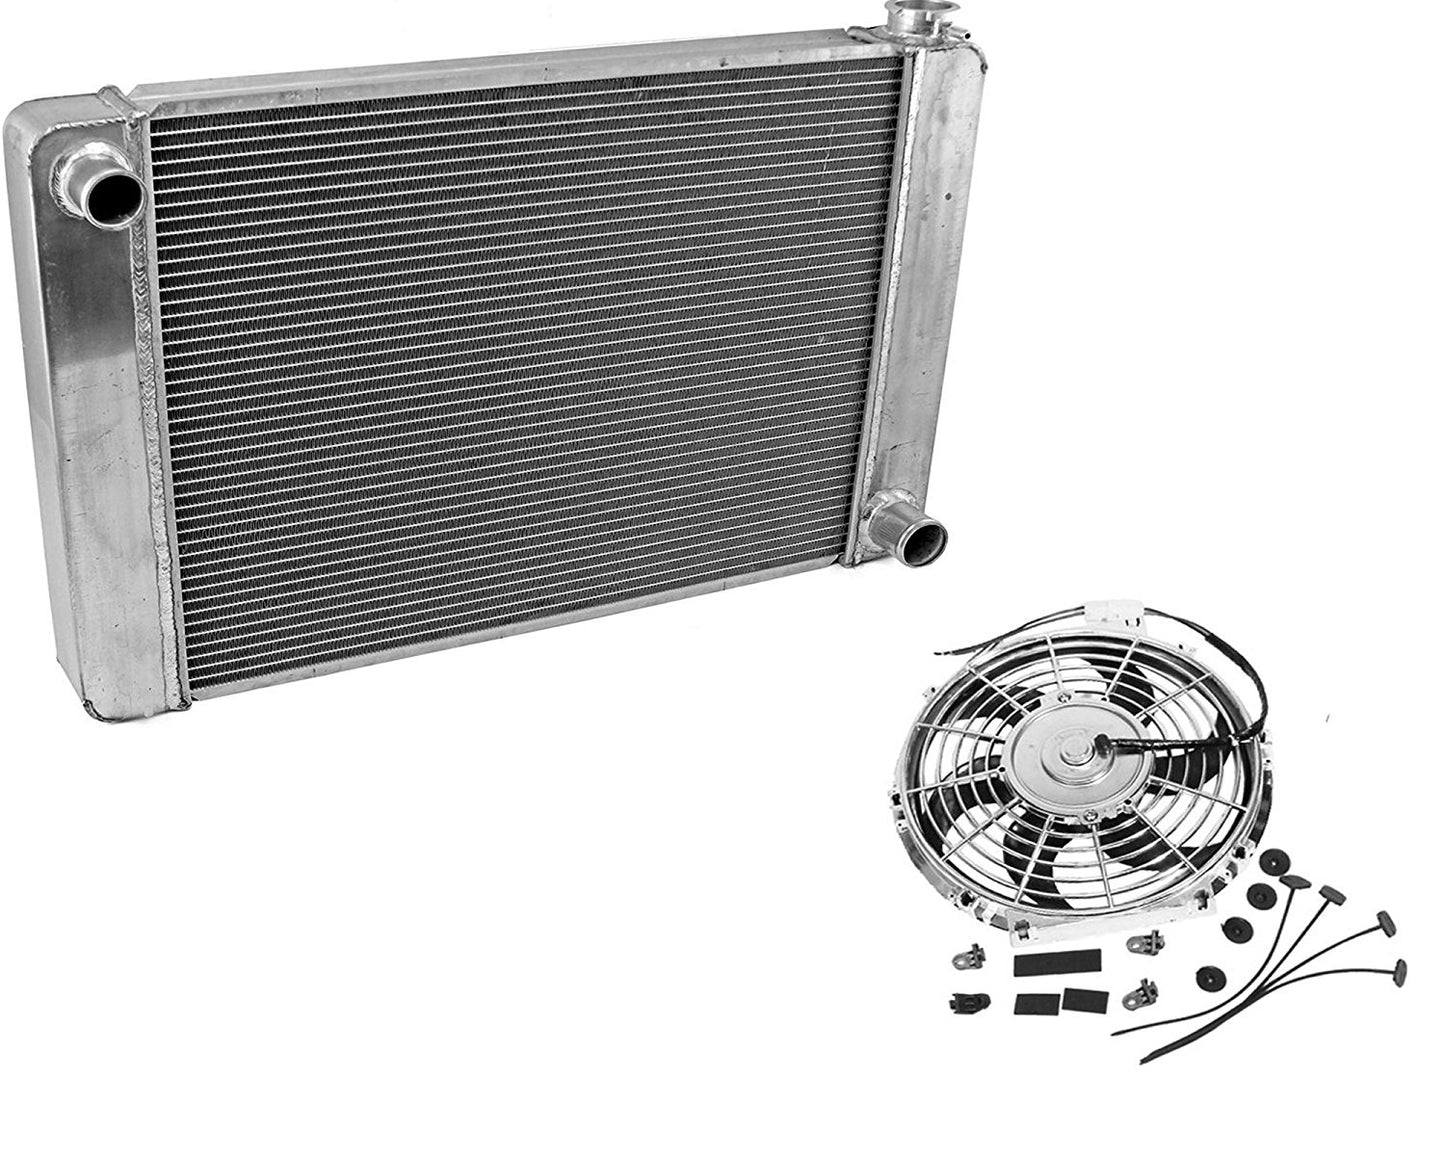 Fabricated Aluminum Radiator 30" x 19" x3" Overall For SBC BBC Chevy GM & 10" Chrome Electric Curved Blade Reversible radiator Cooling Fan